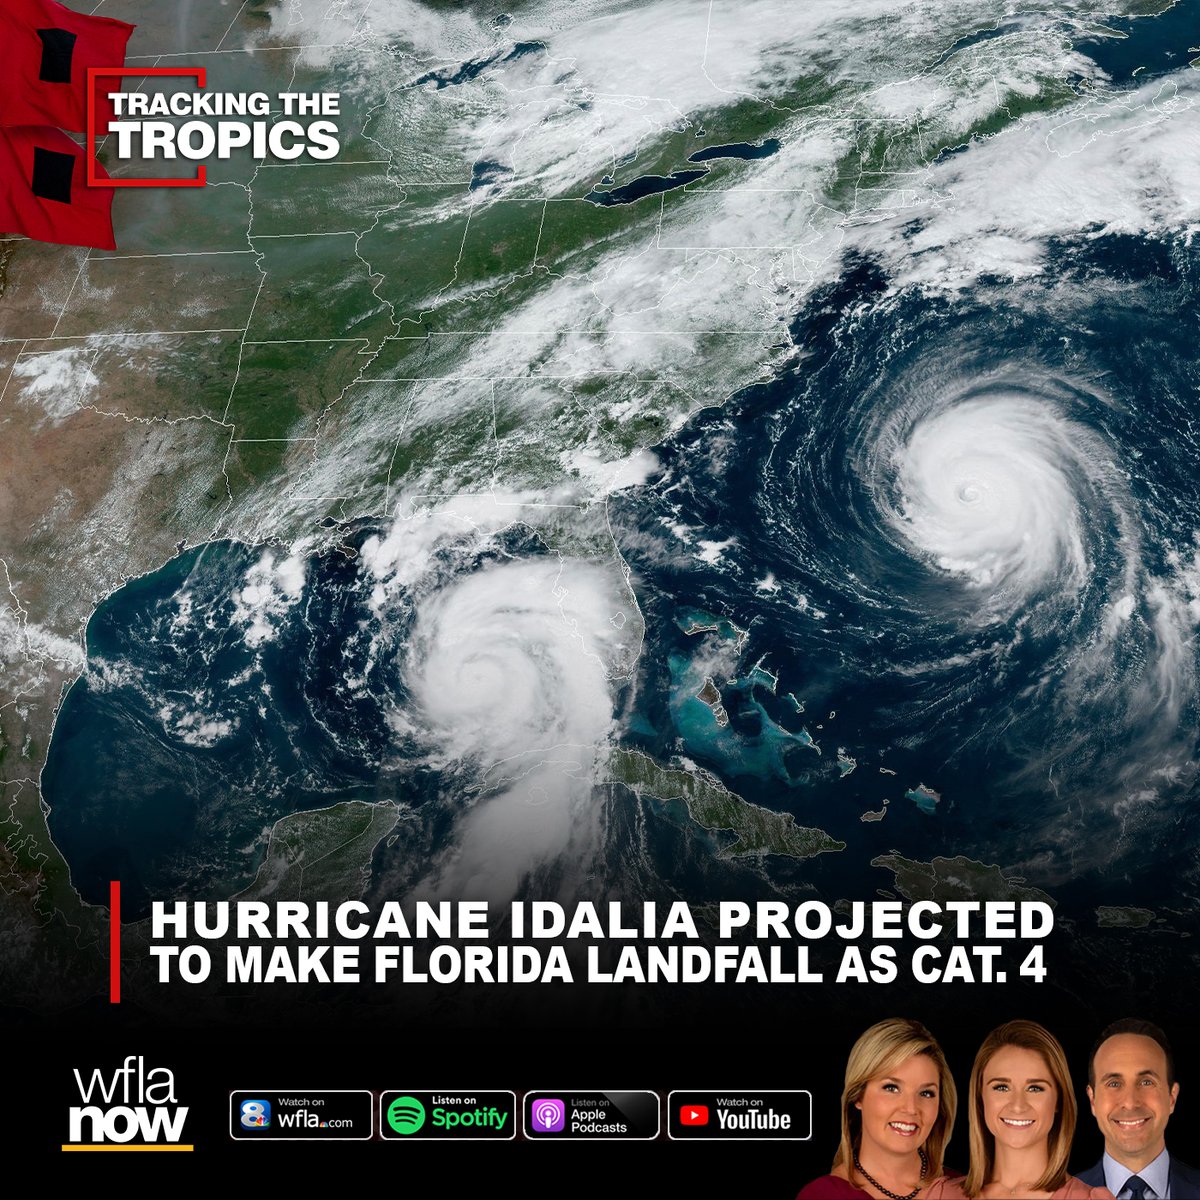 #BREAKING: Idalia is now expected to make landfall in the Big Bend area of Florida as an “extremely dangerous” Category 4 hurricane, according to the National Hurricane Center. bit.ly/3QZz3O6